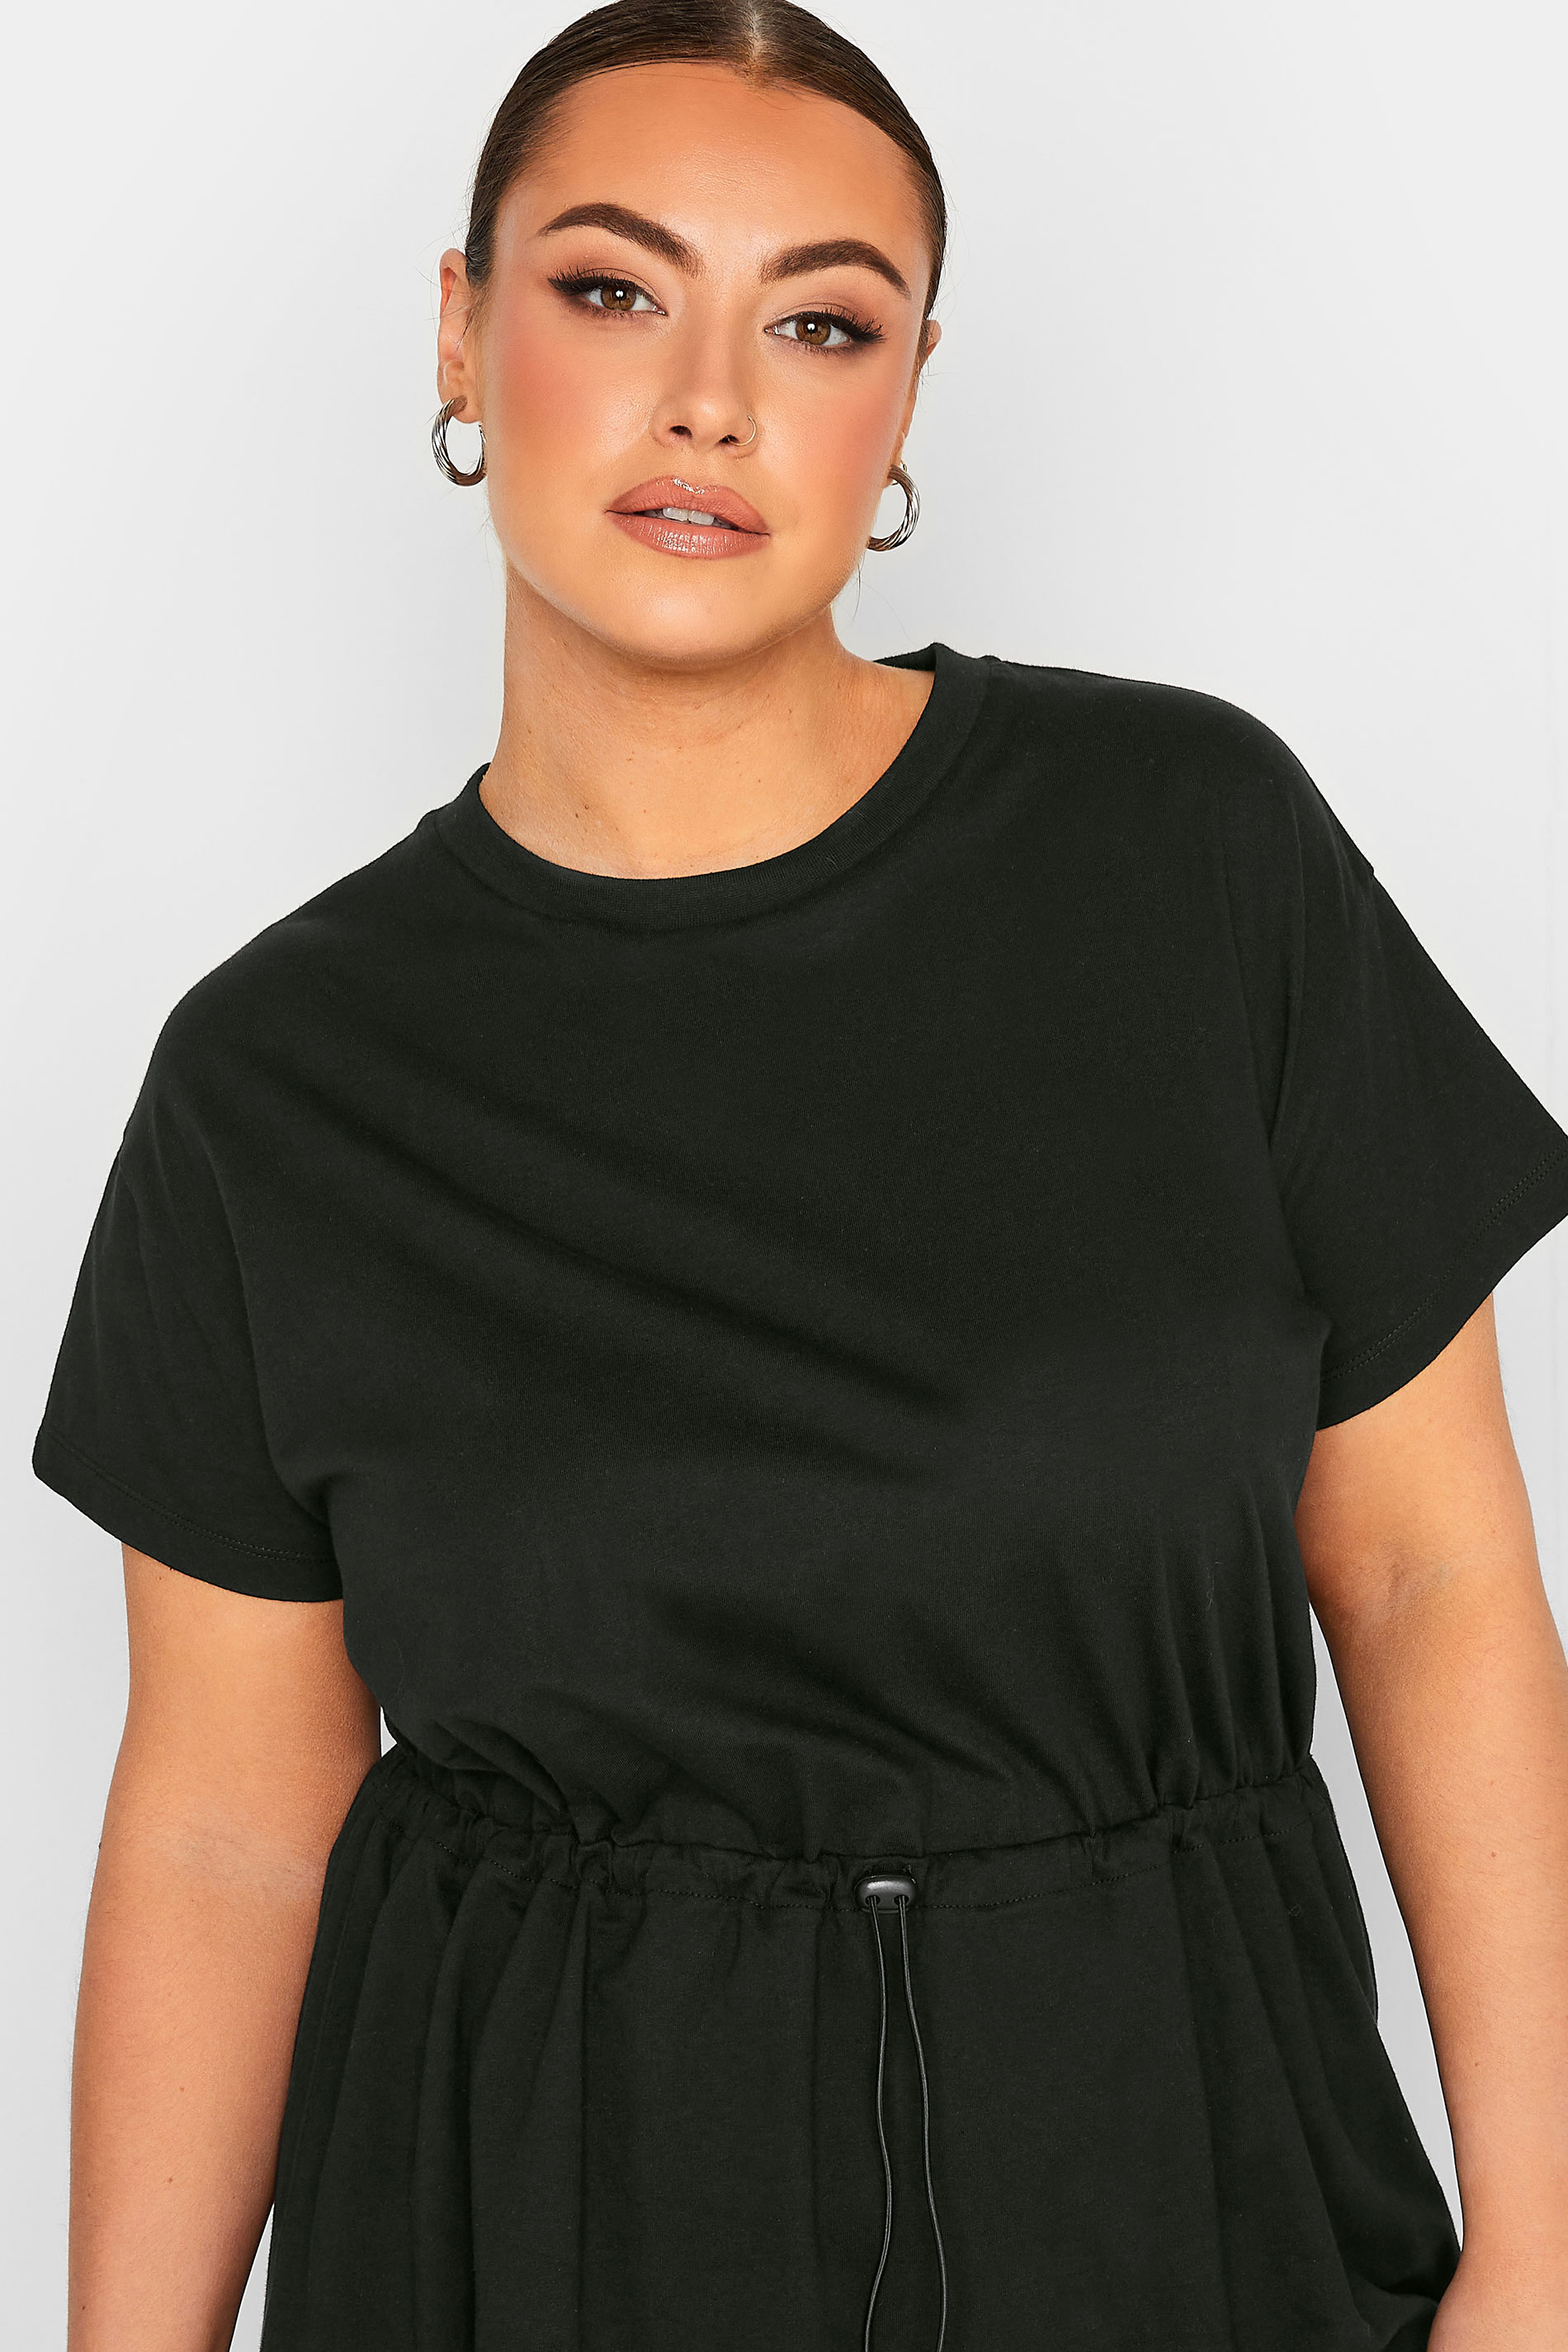 LIMITED COLLECTION Plus Size Black Toggle Tunic Top | Yours Clothing